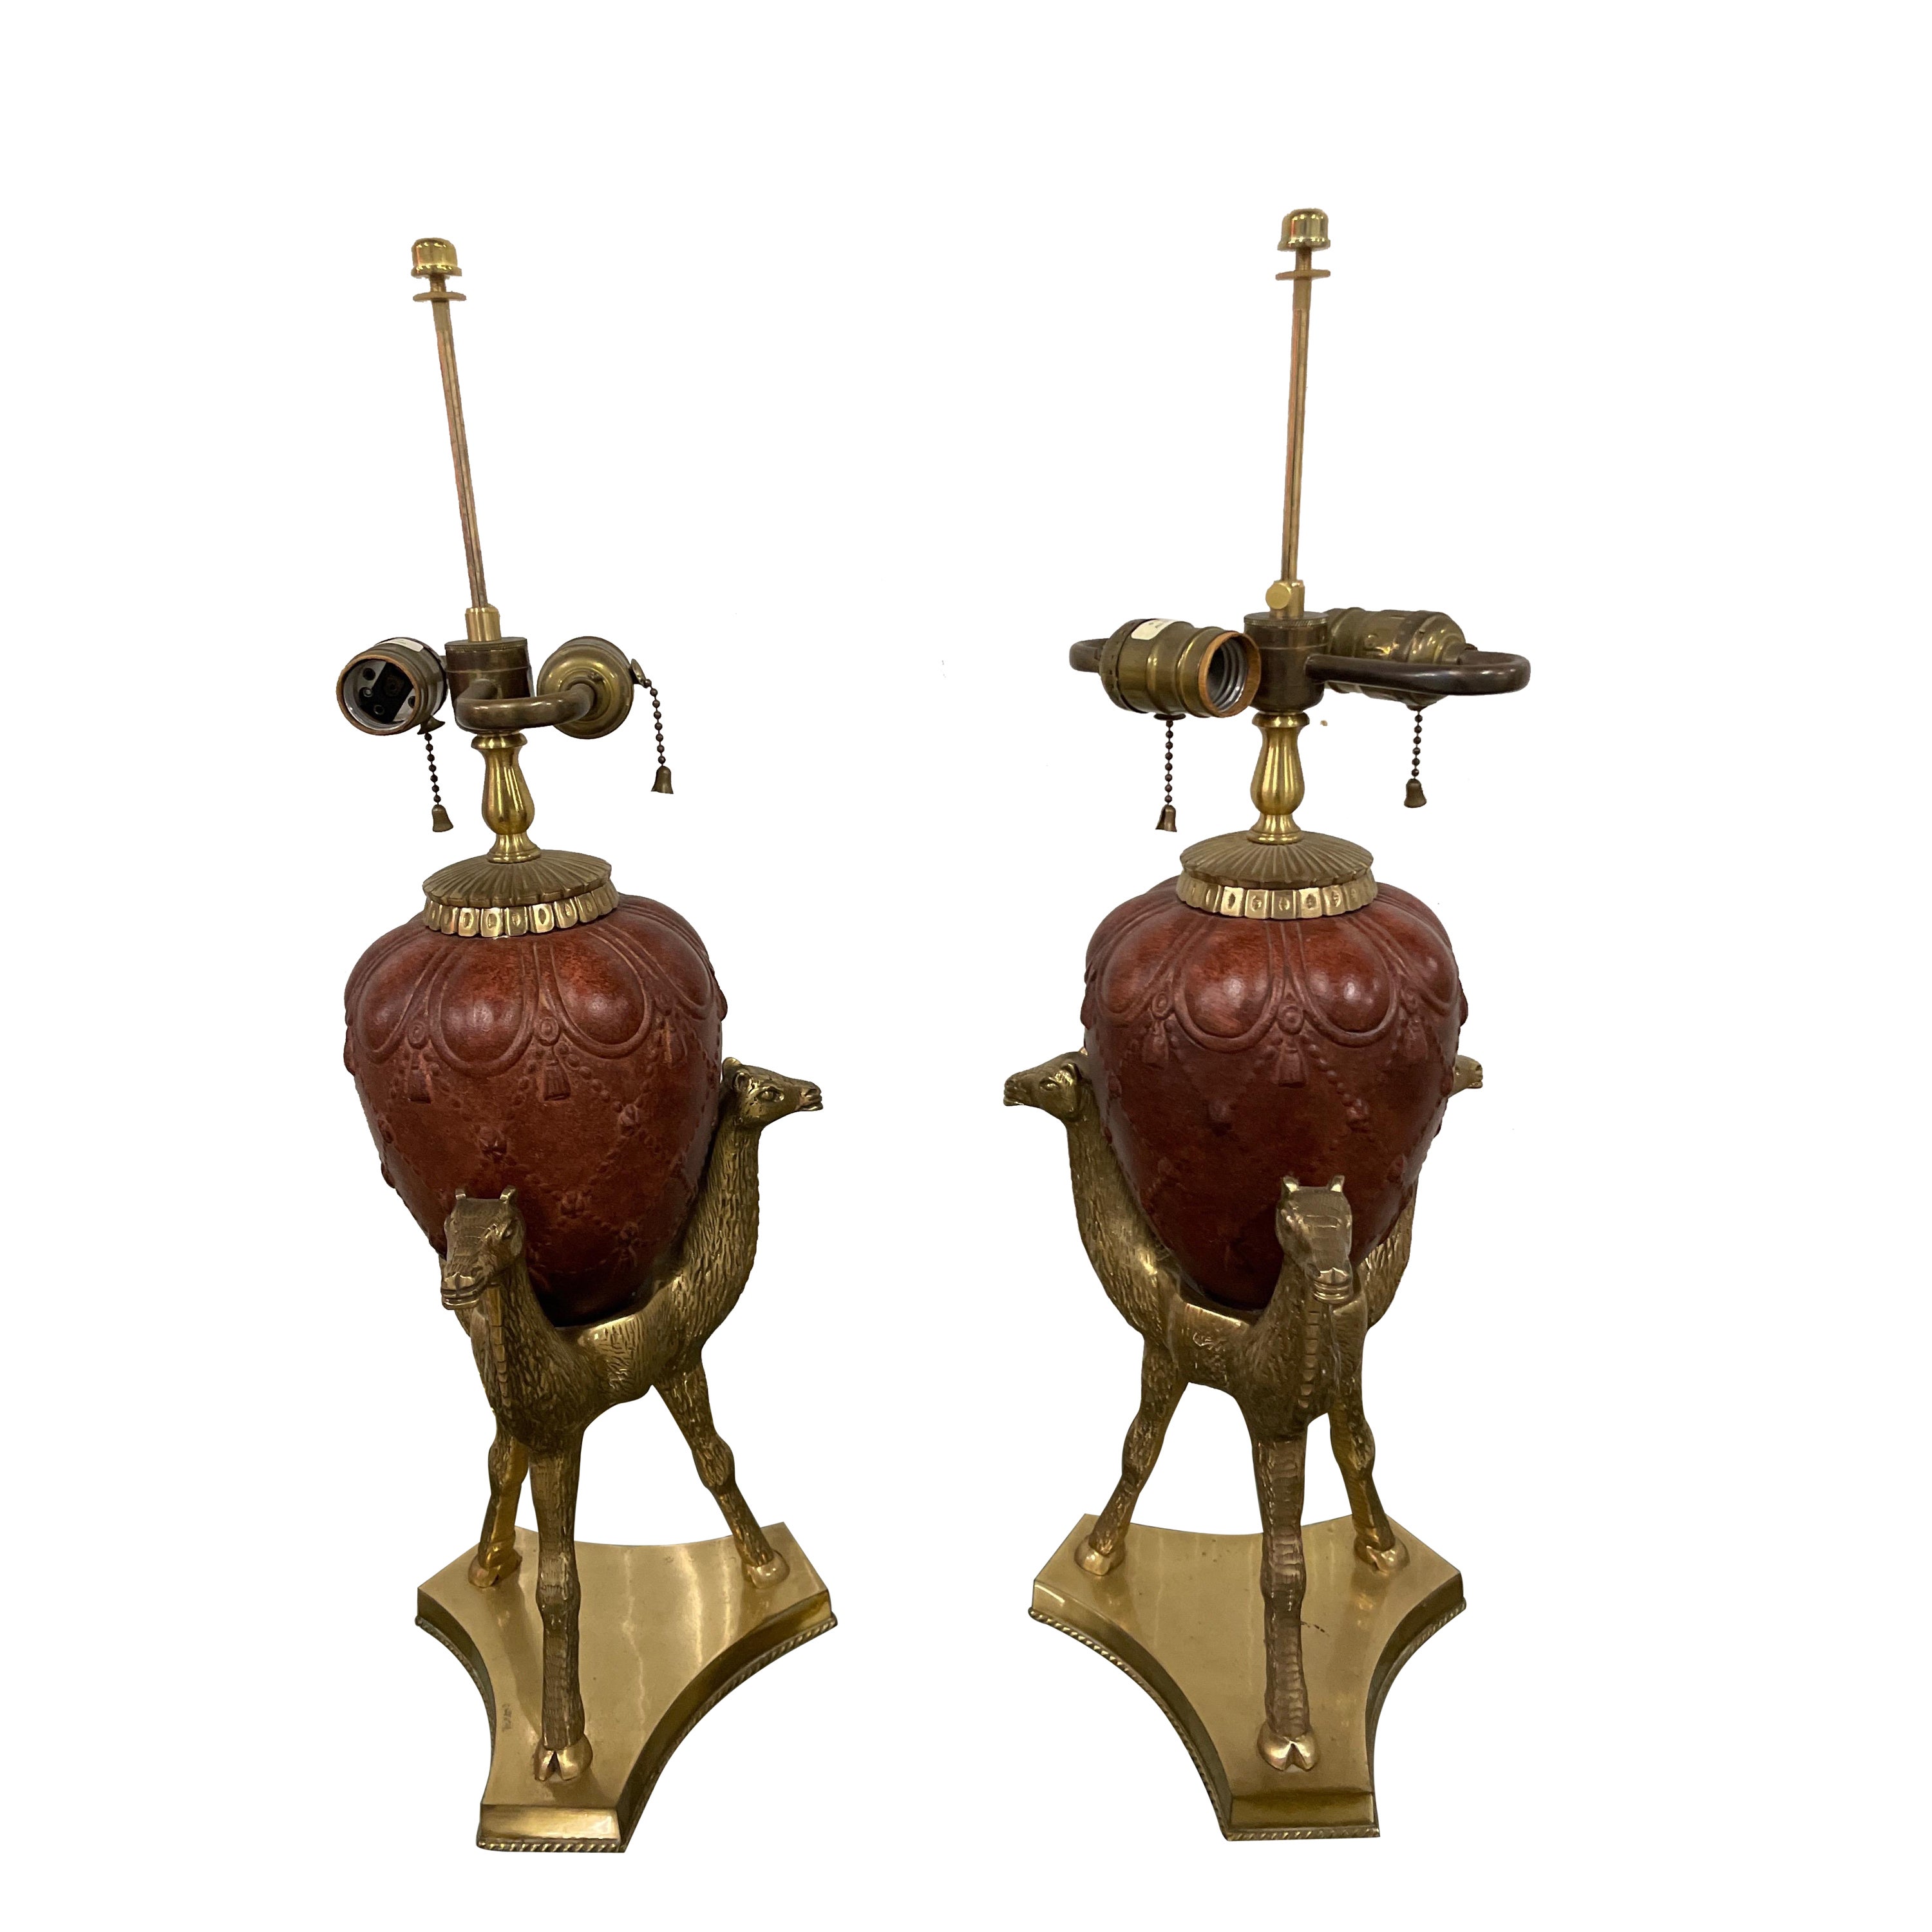 Pair of Vintage Camel Lamps by Chapman